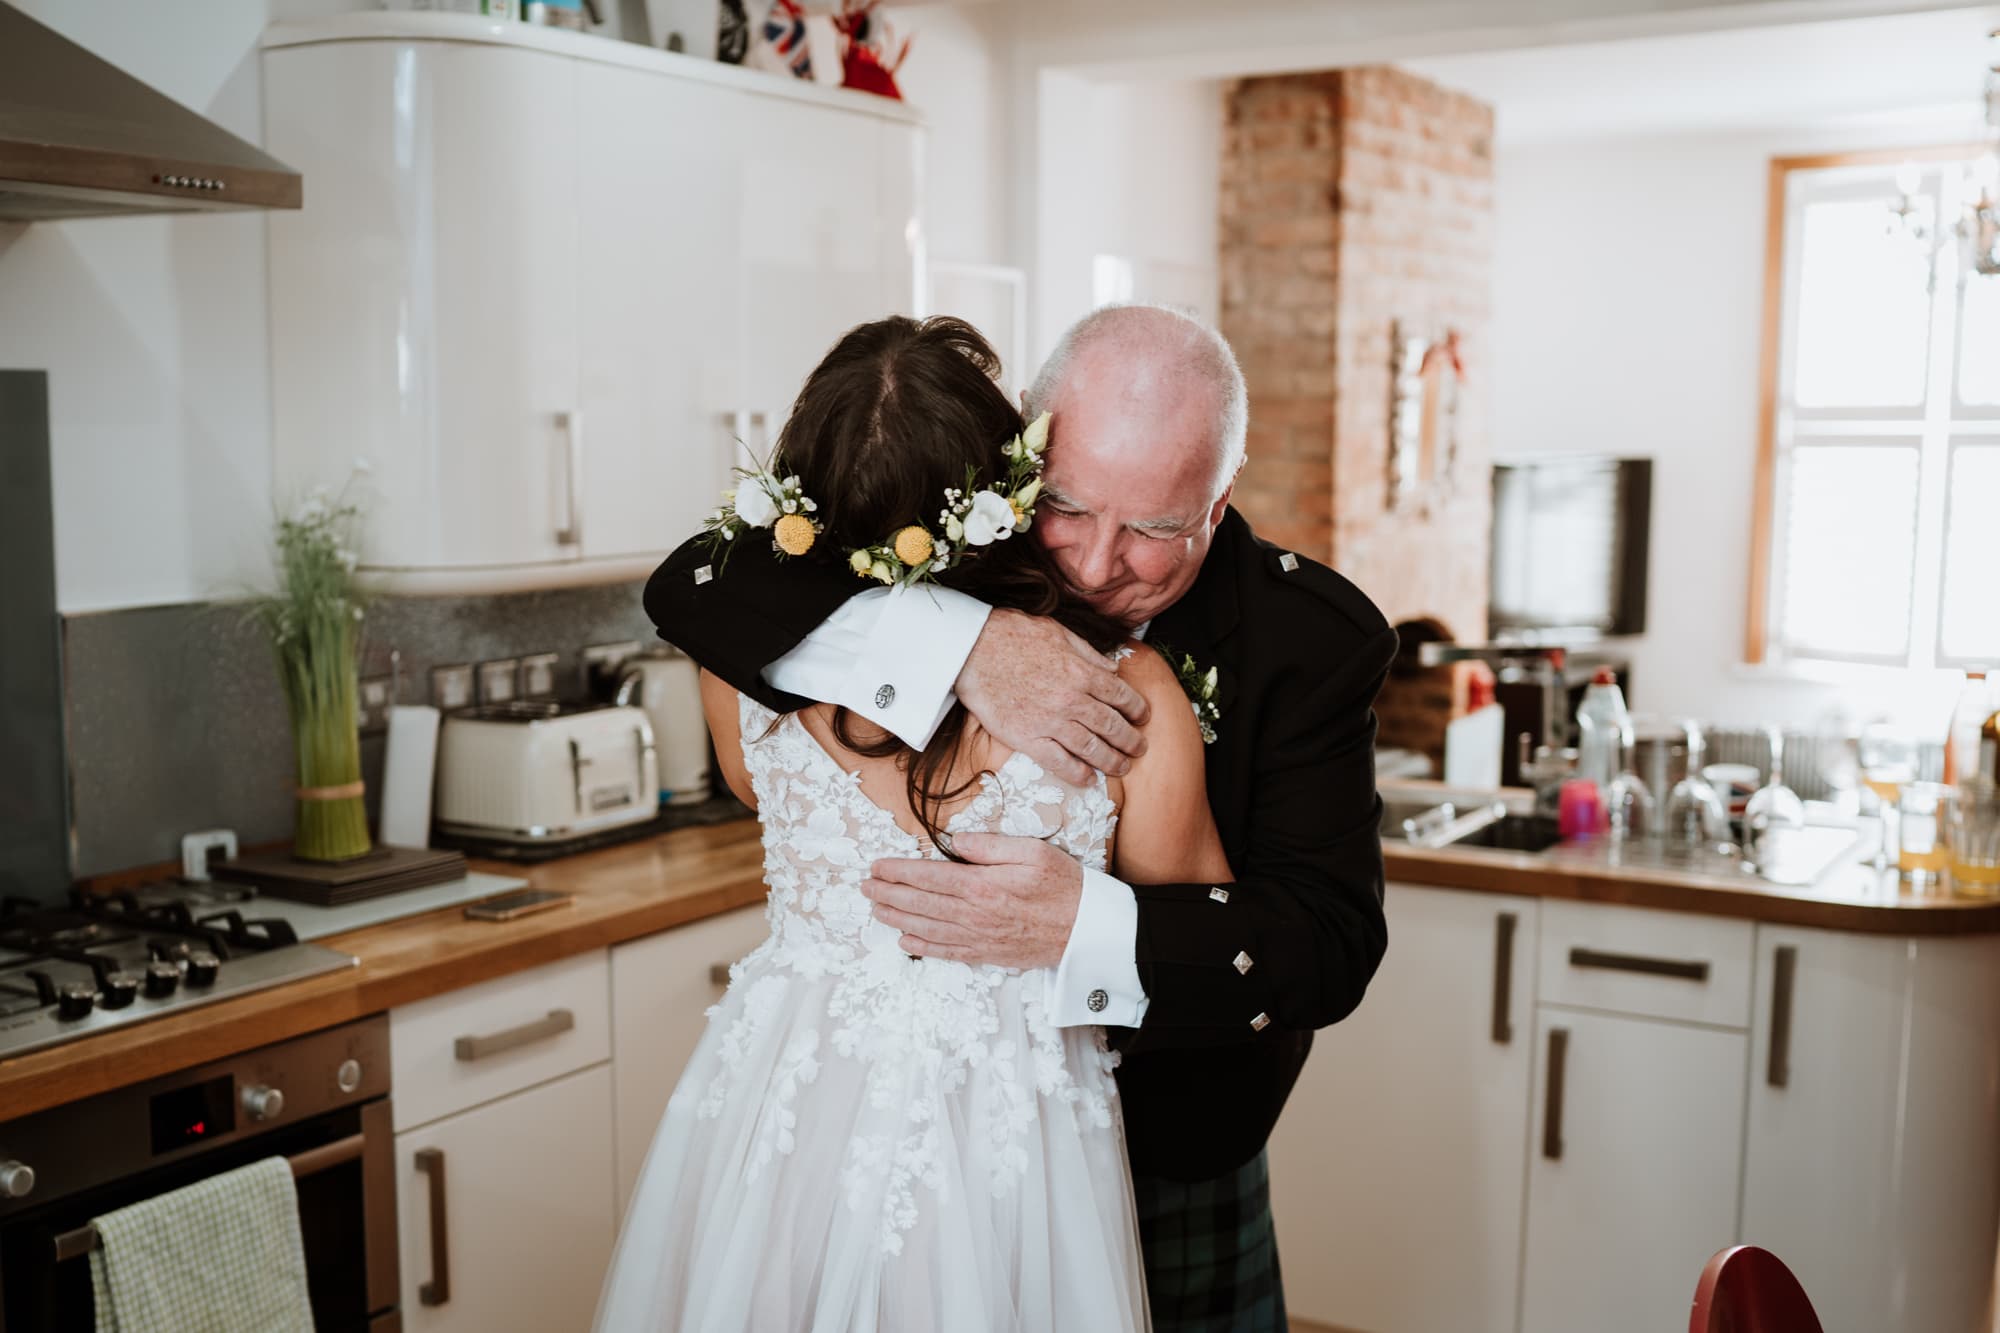 Bride and her father having a cuddle after seeing each other for the first time before her wedding